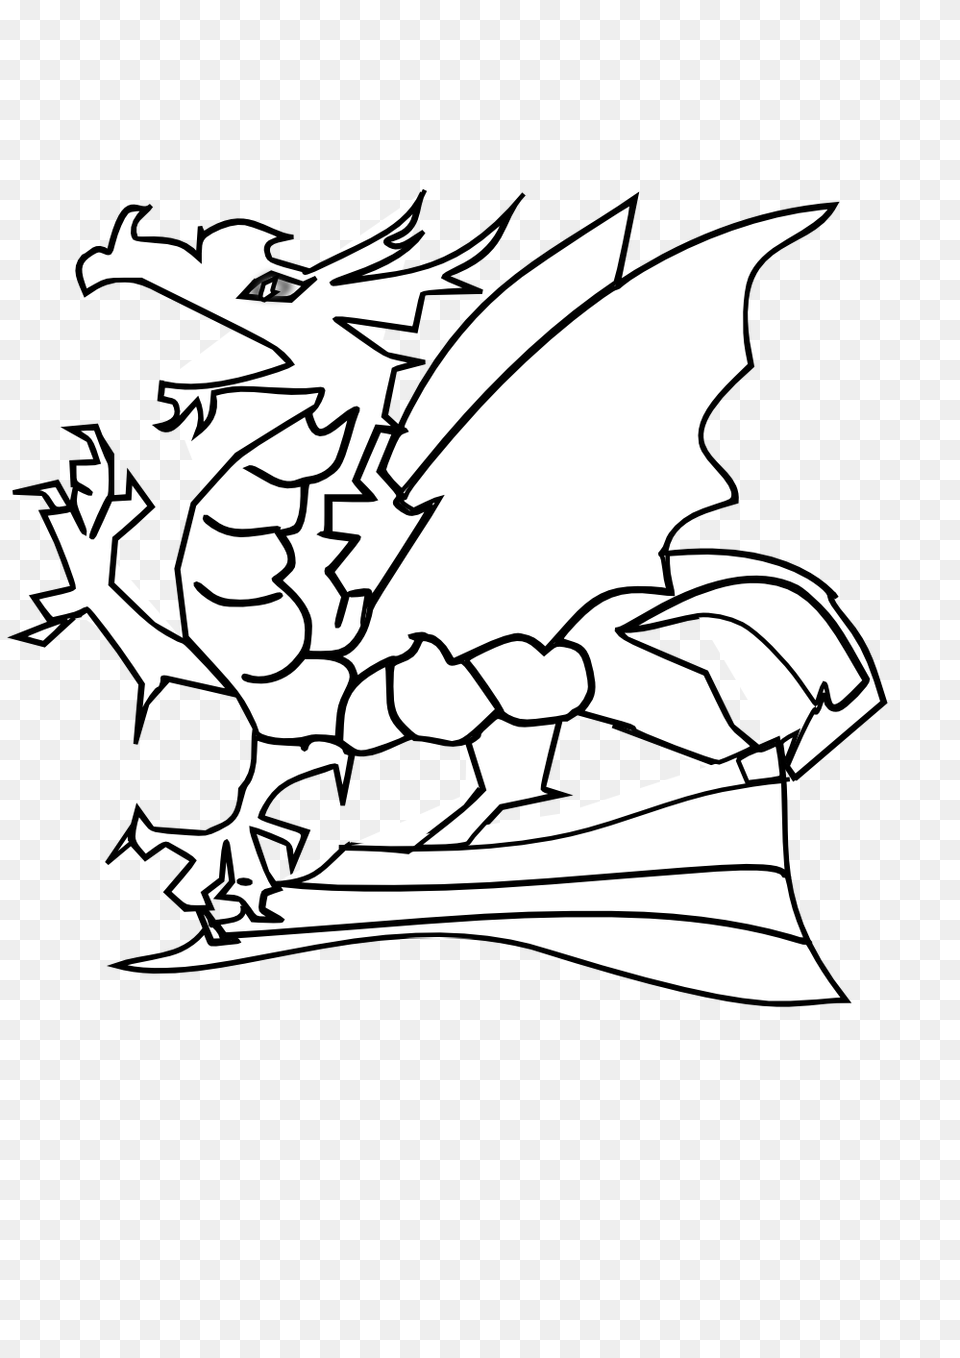 Cute Dragon Black And White Colouring Template Dragon Black And White Template Of A Dragon, Art, Drawing, Animal, Fish Png Image